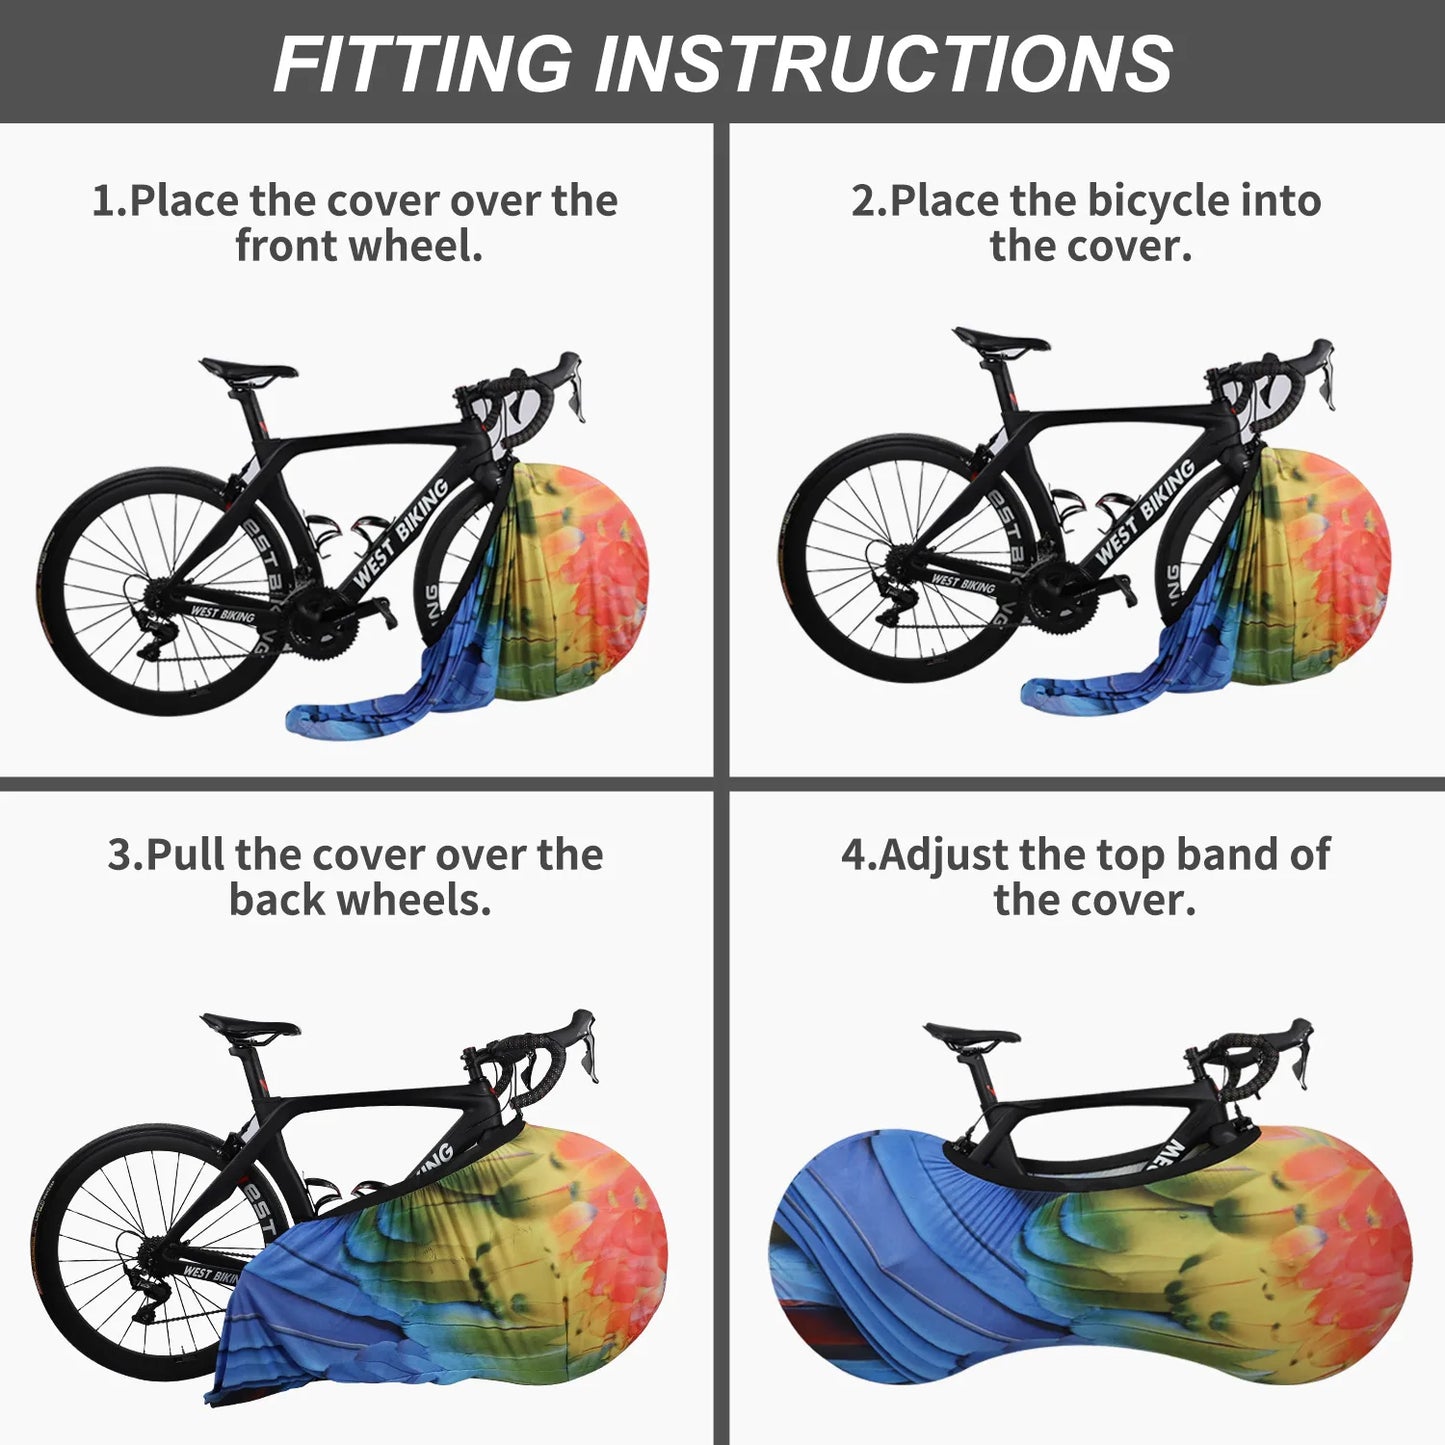 WEST BIKING Bicycle Cover multi colors for  MTB and Road Bike